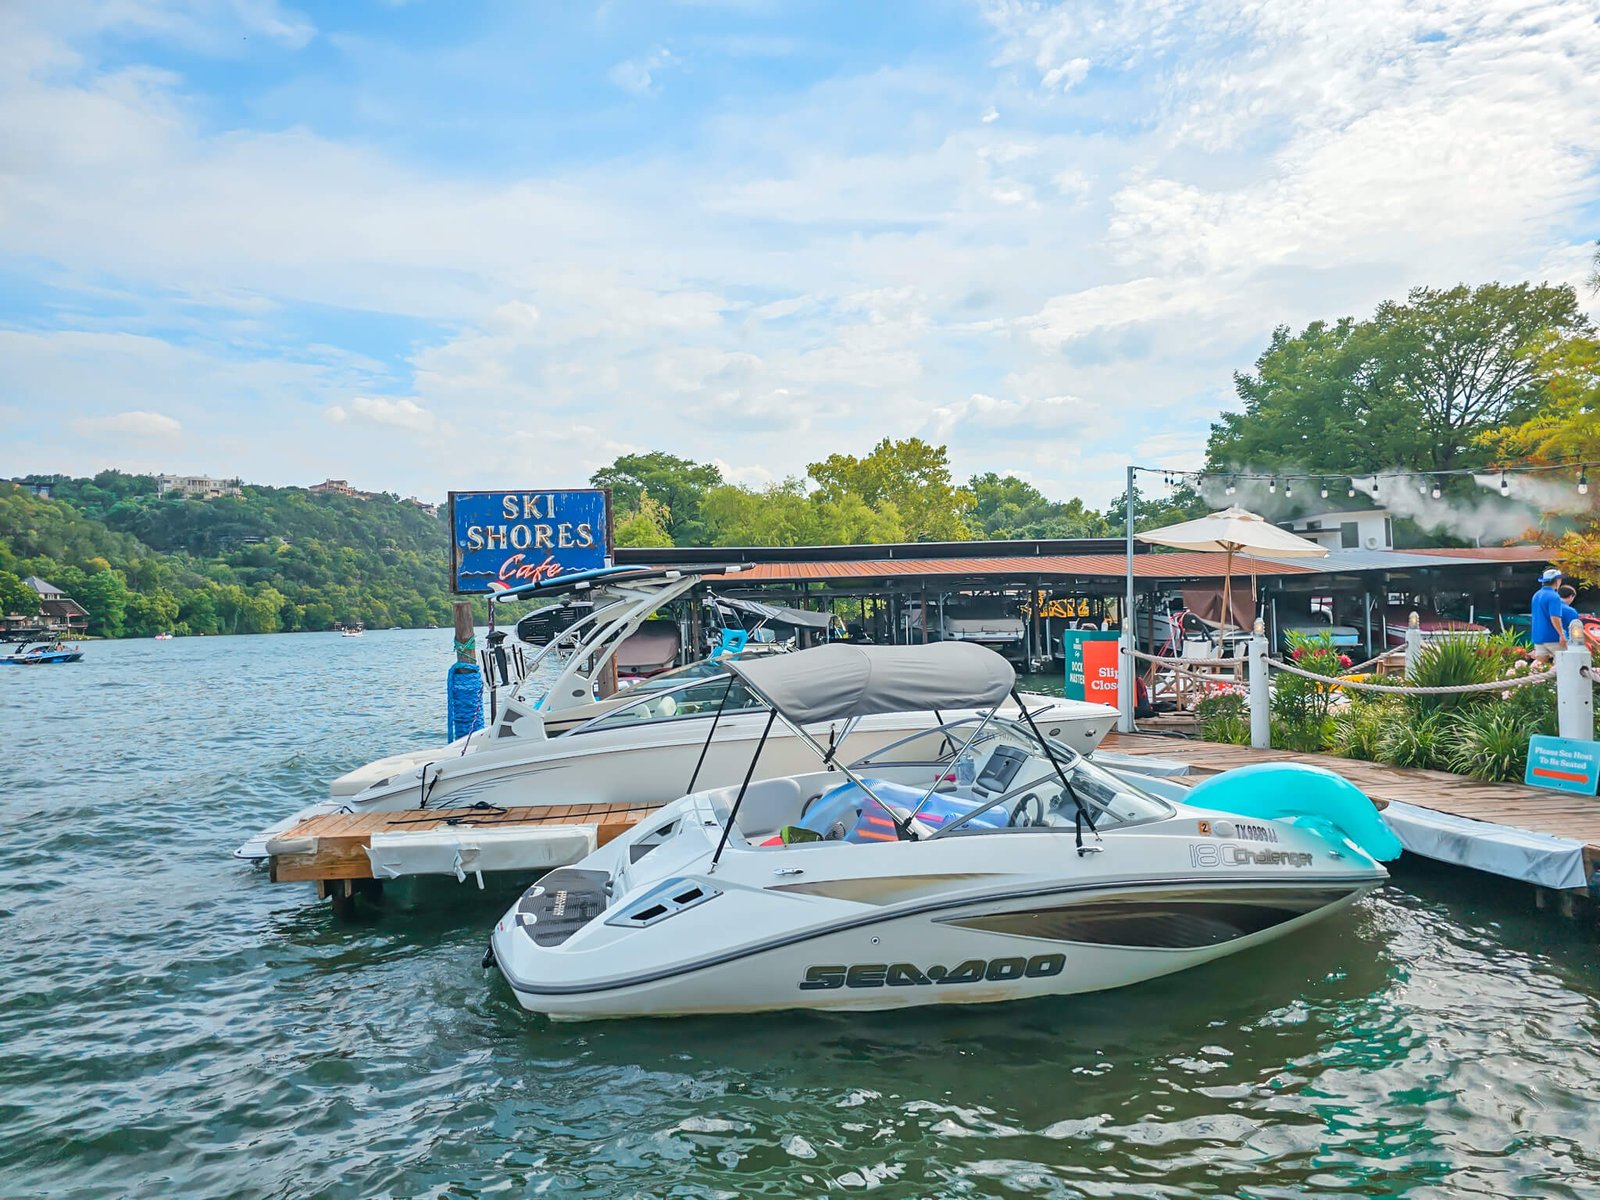 renting a boat in Austin, fun things to do in Austin, Texas